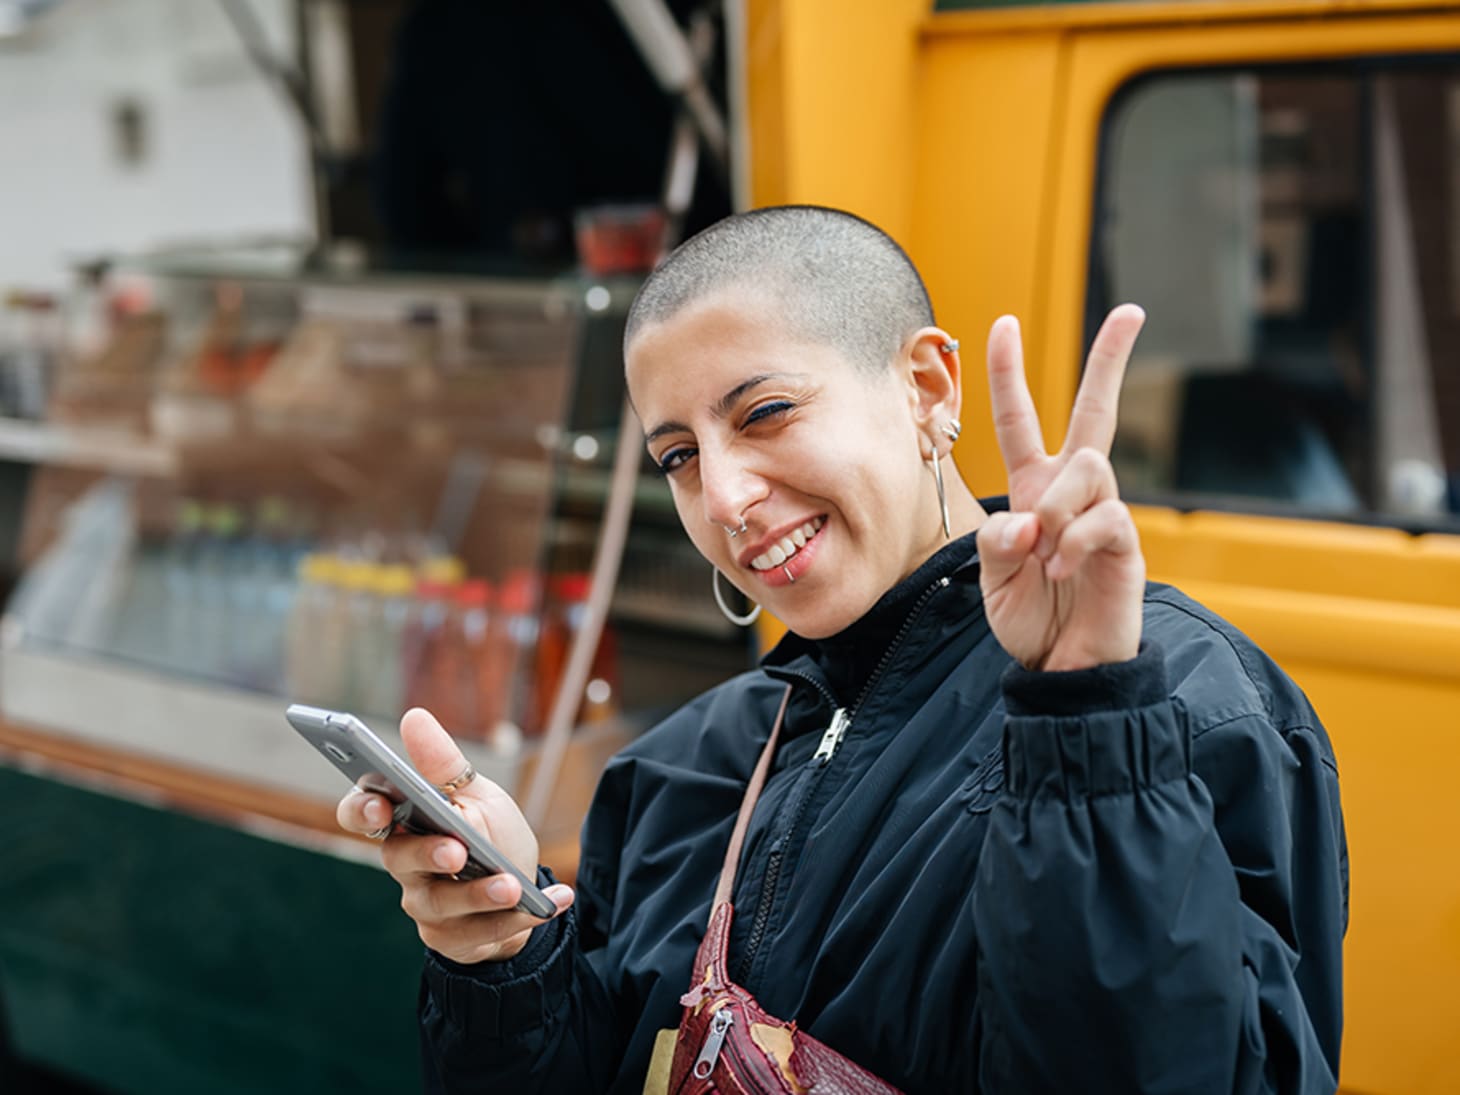 woman with shaved head flashing peace sign